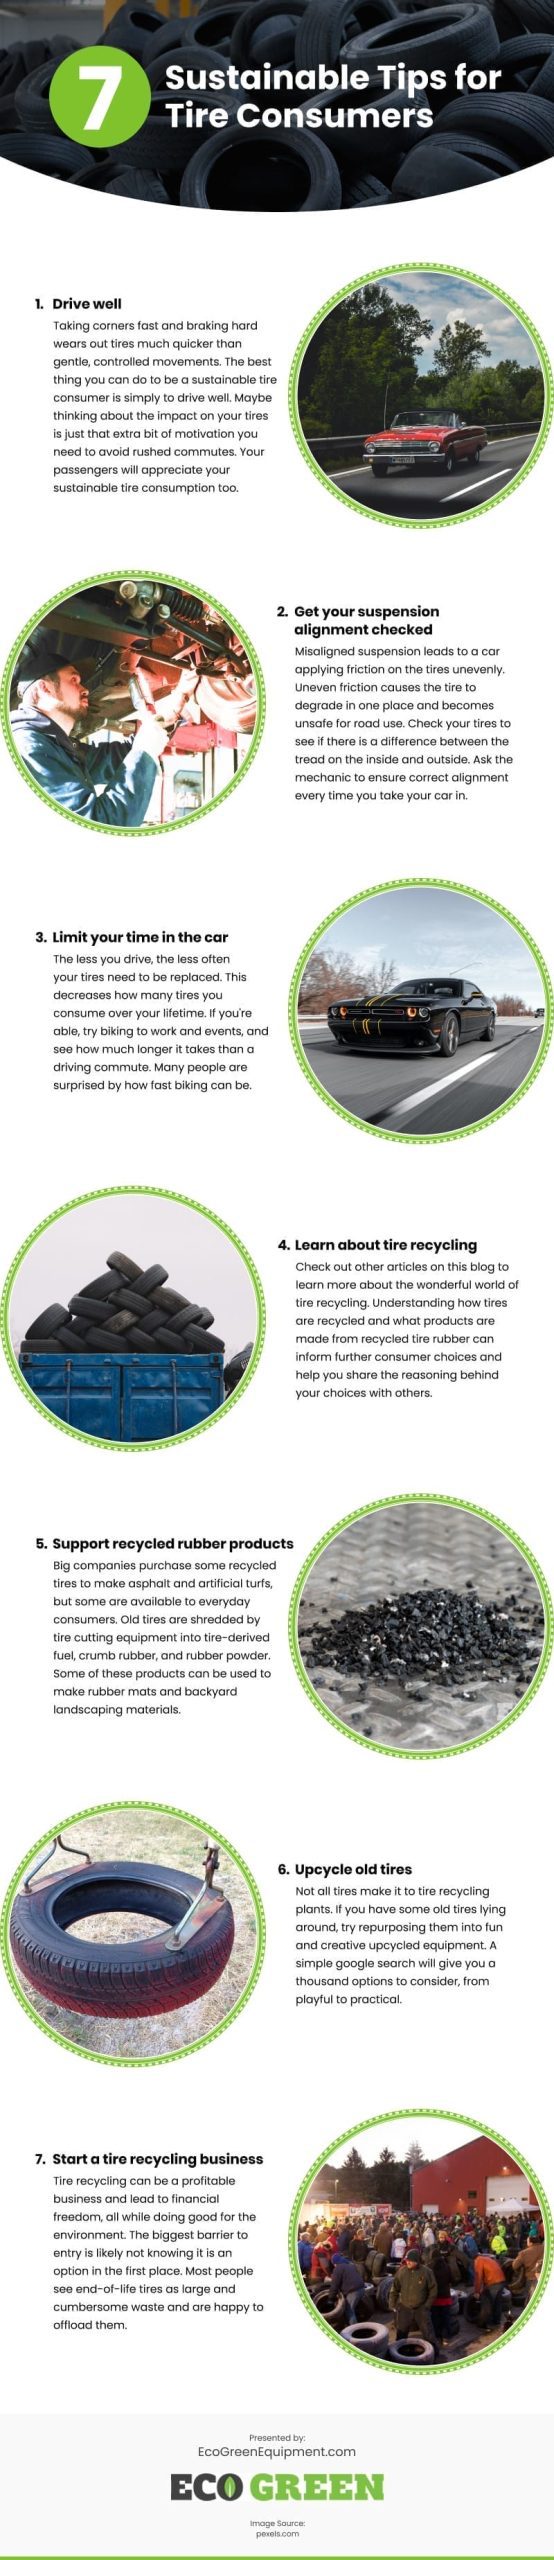 7 Sustainable Tips for Tire Consumers Infographic